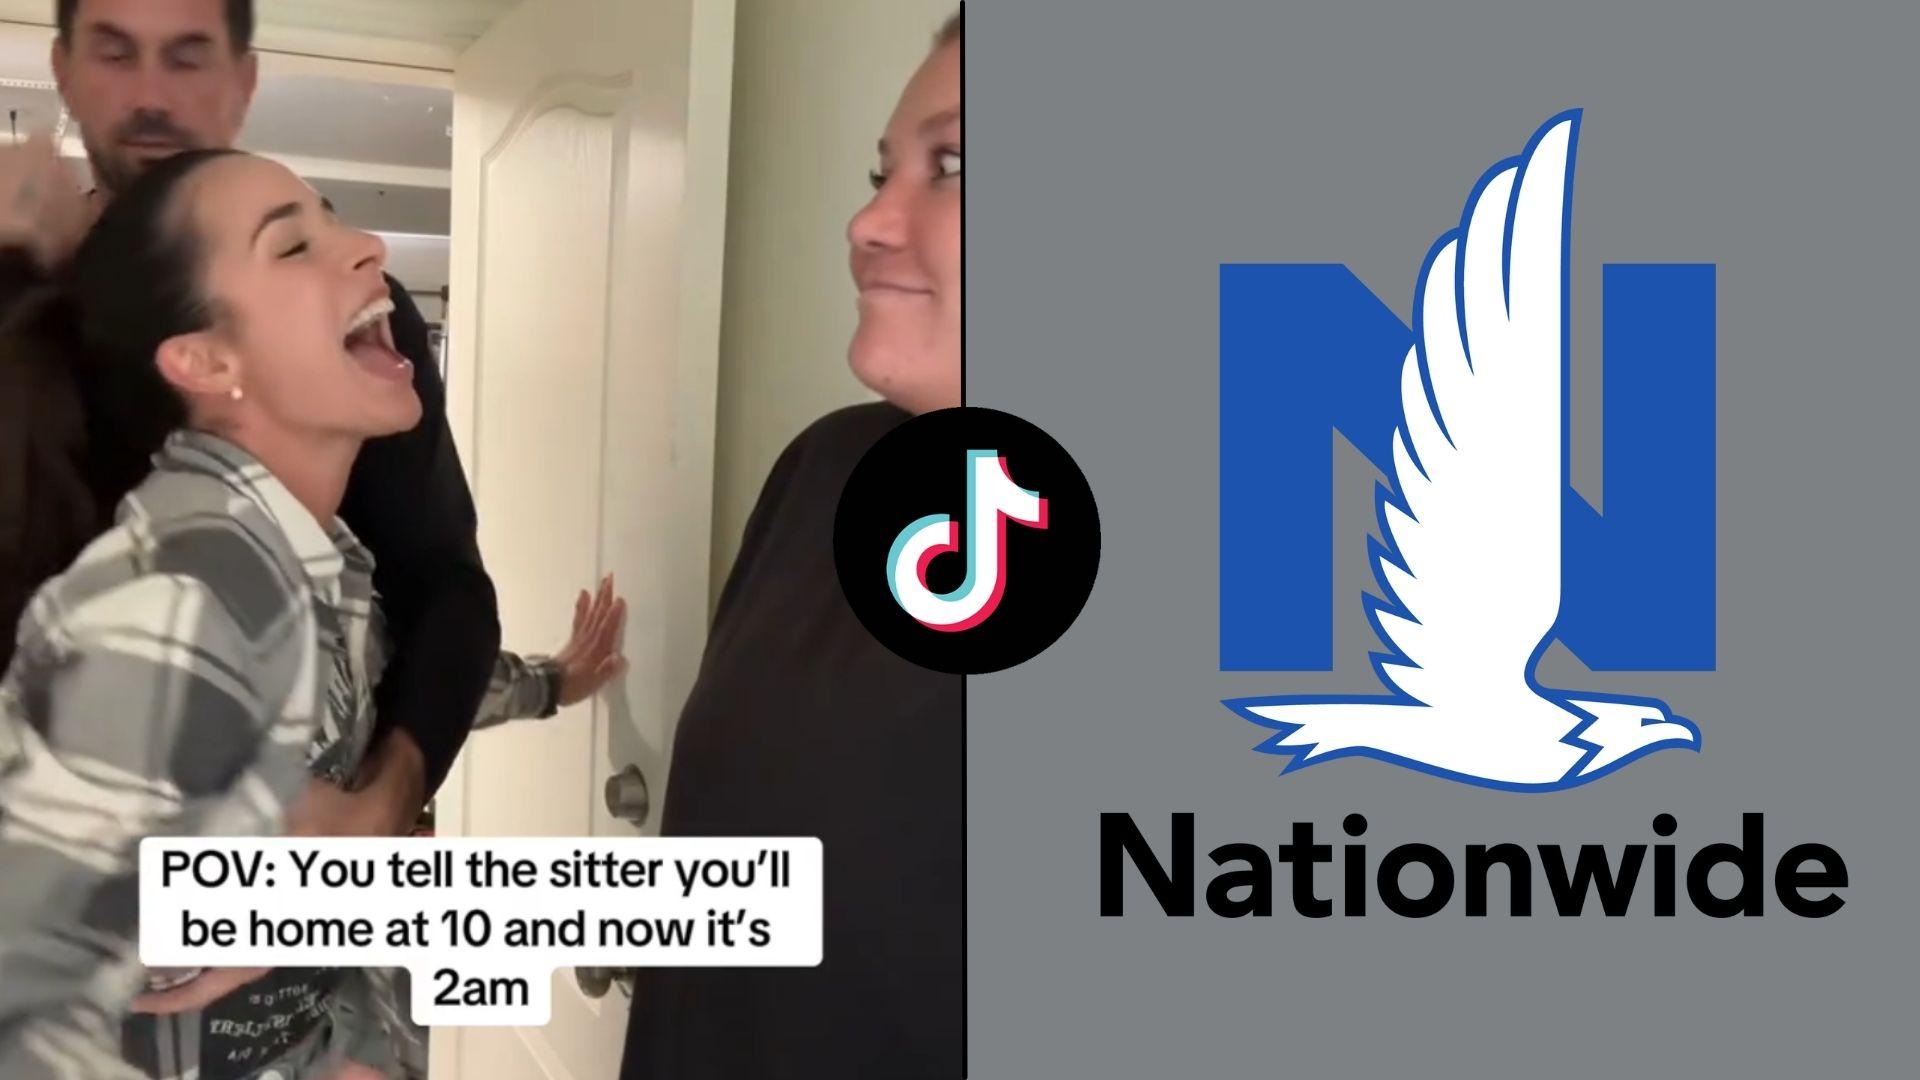 Woman singing while being held back side-by-side with TikTok and Nationwide logo